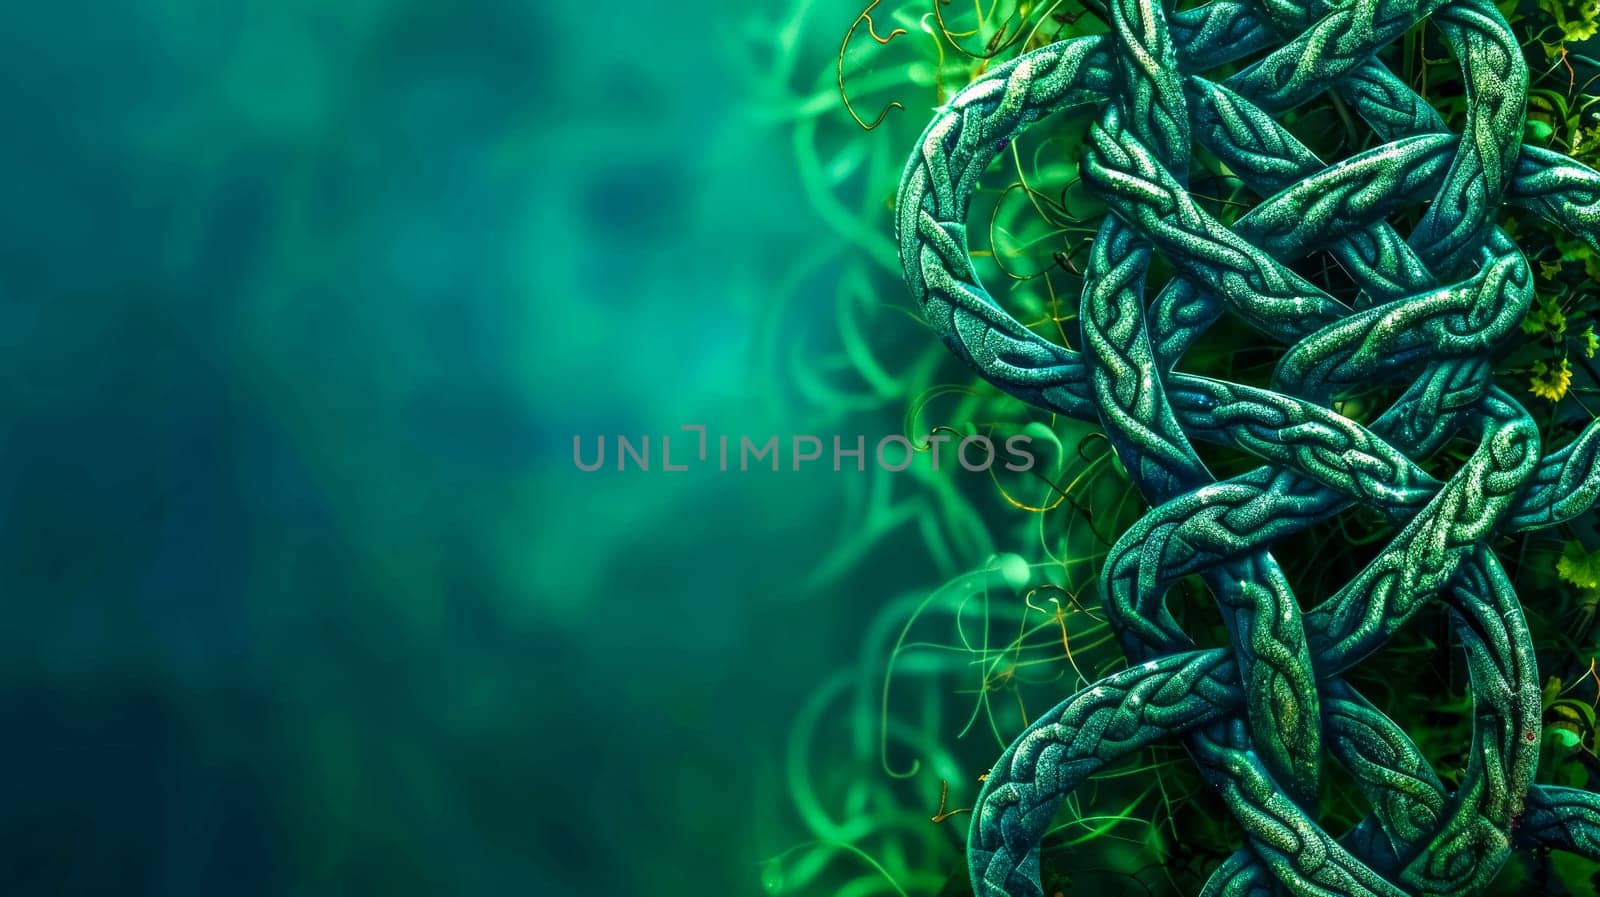 Verdant chain links on a green background by Edophoto